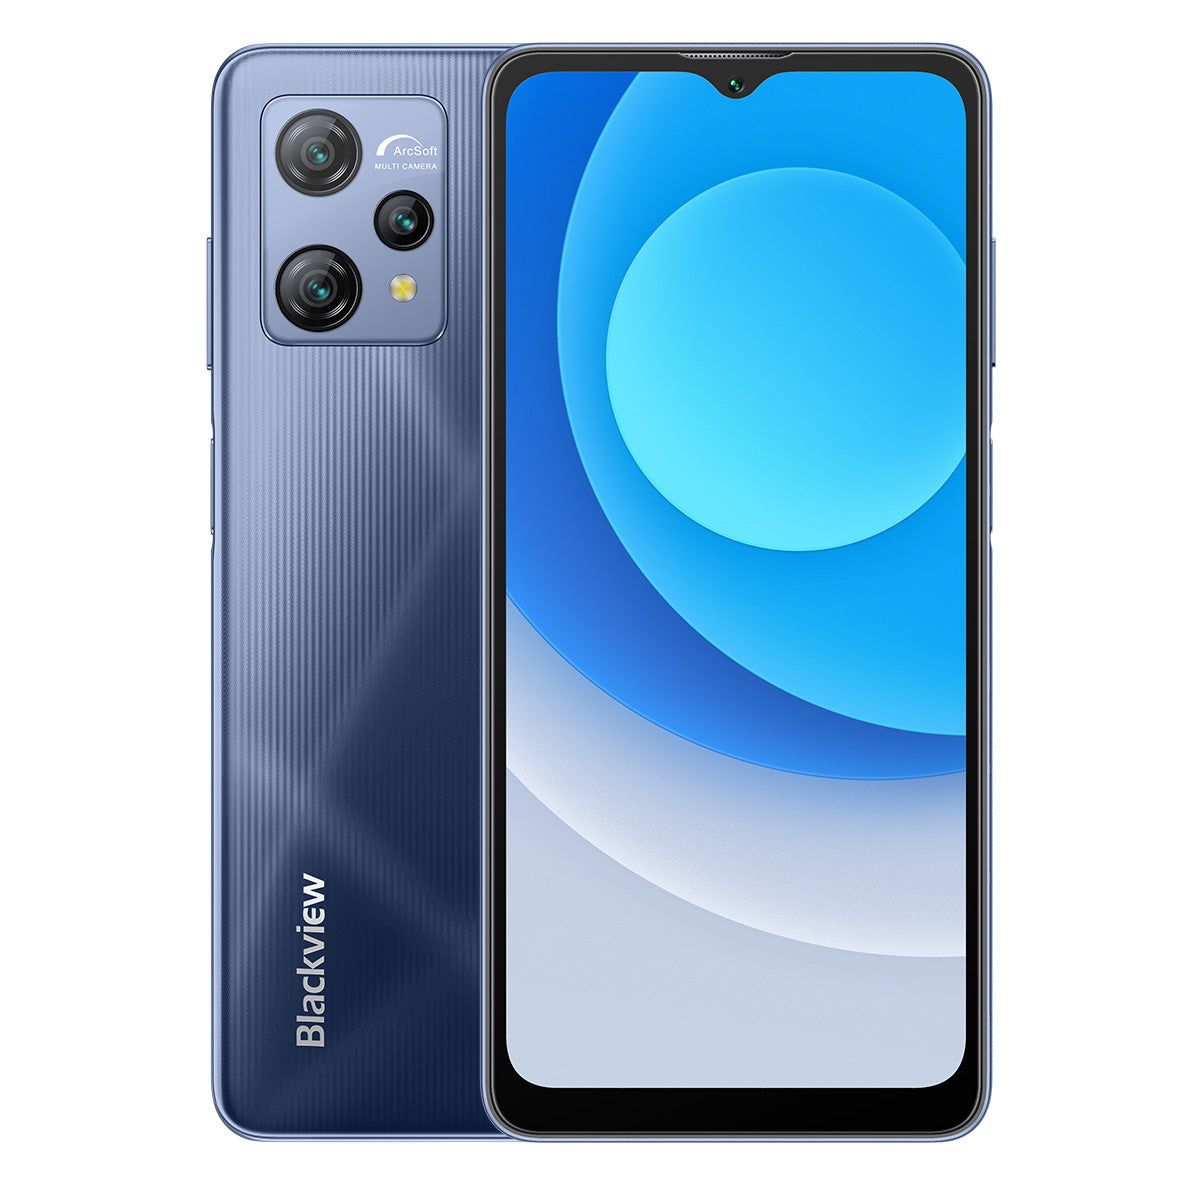 Blackview A53 Pro 4GB+64GB を購入する – Blackview Official Store